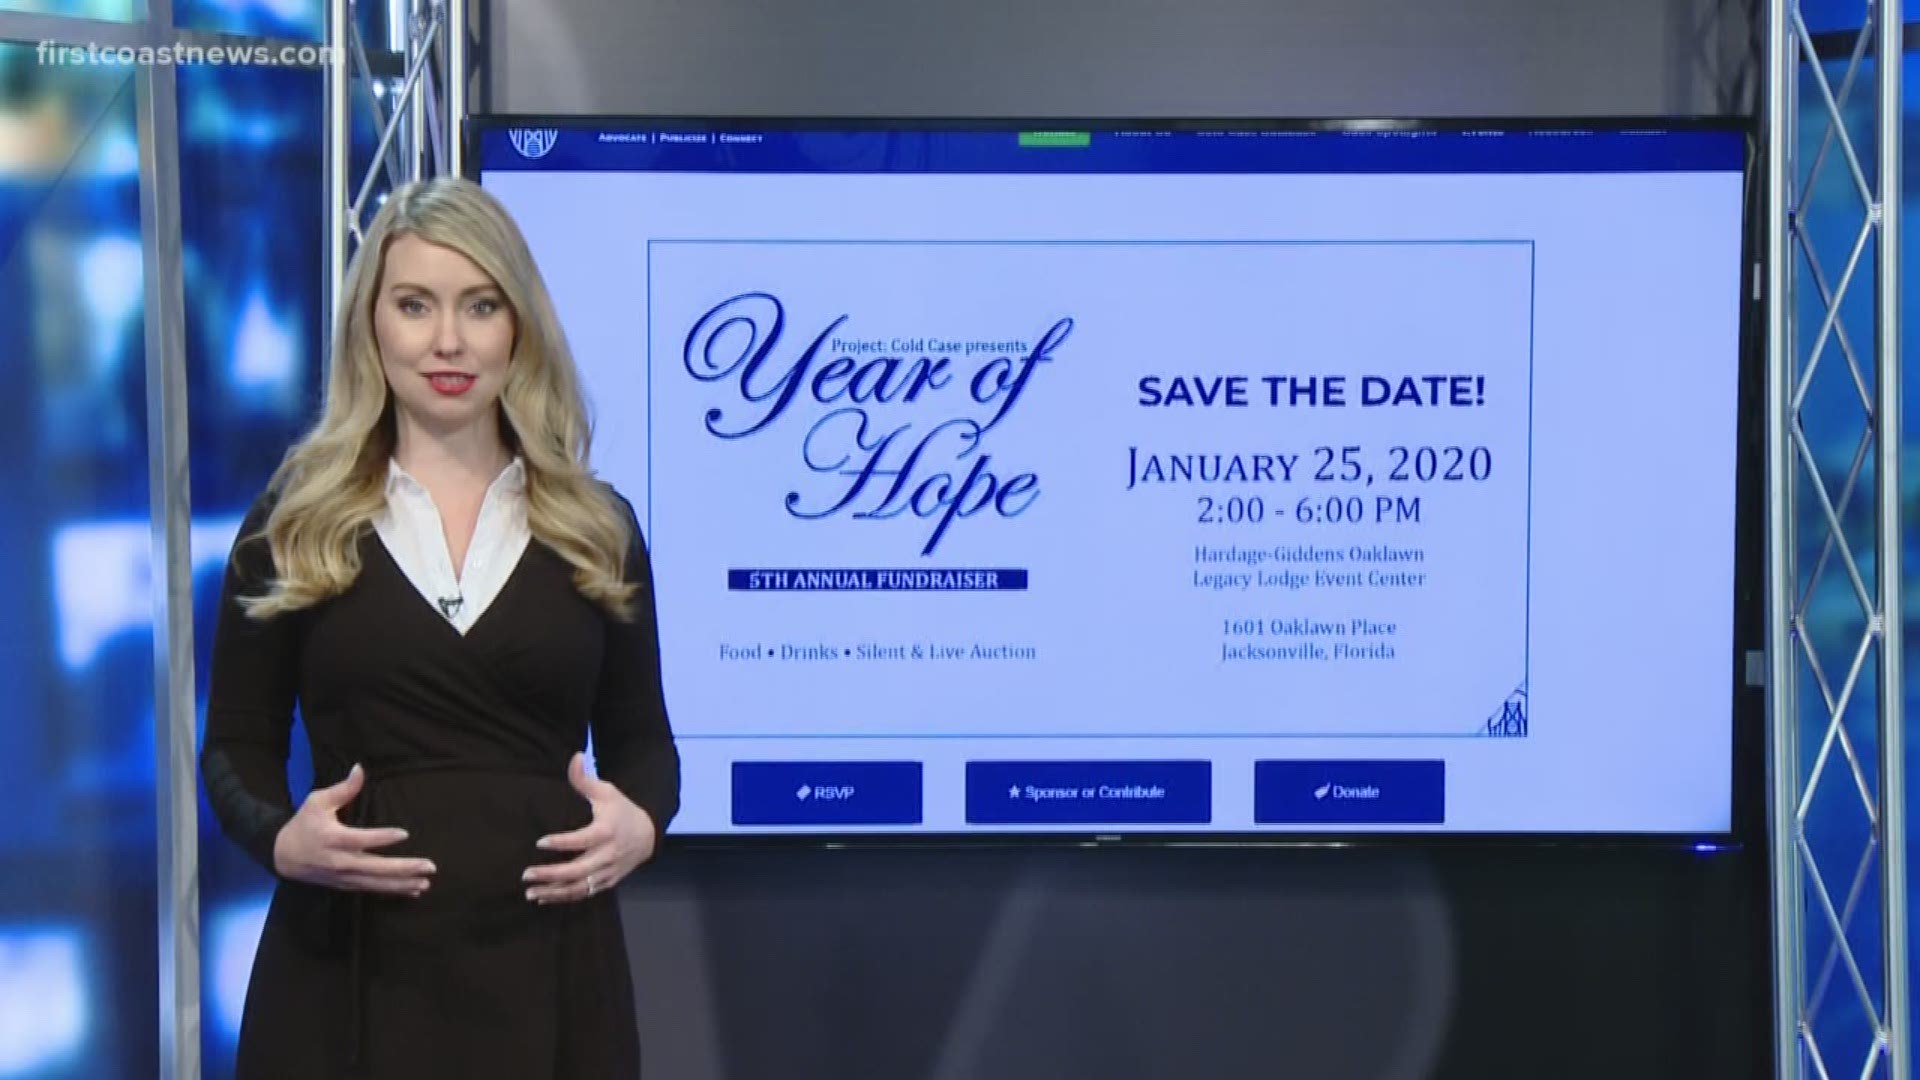 Year of Hope is Project: Cold Case’s annual fundraising event. Each year, they gather a great selection of auction items for bidding, have food and tons of fun!